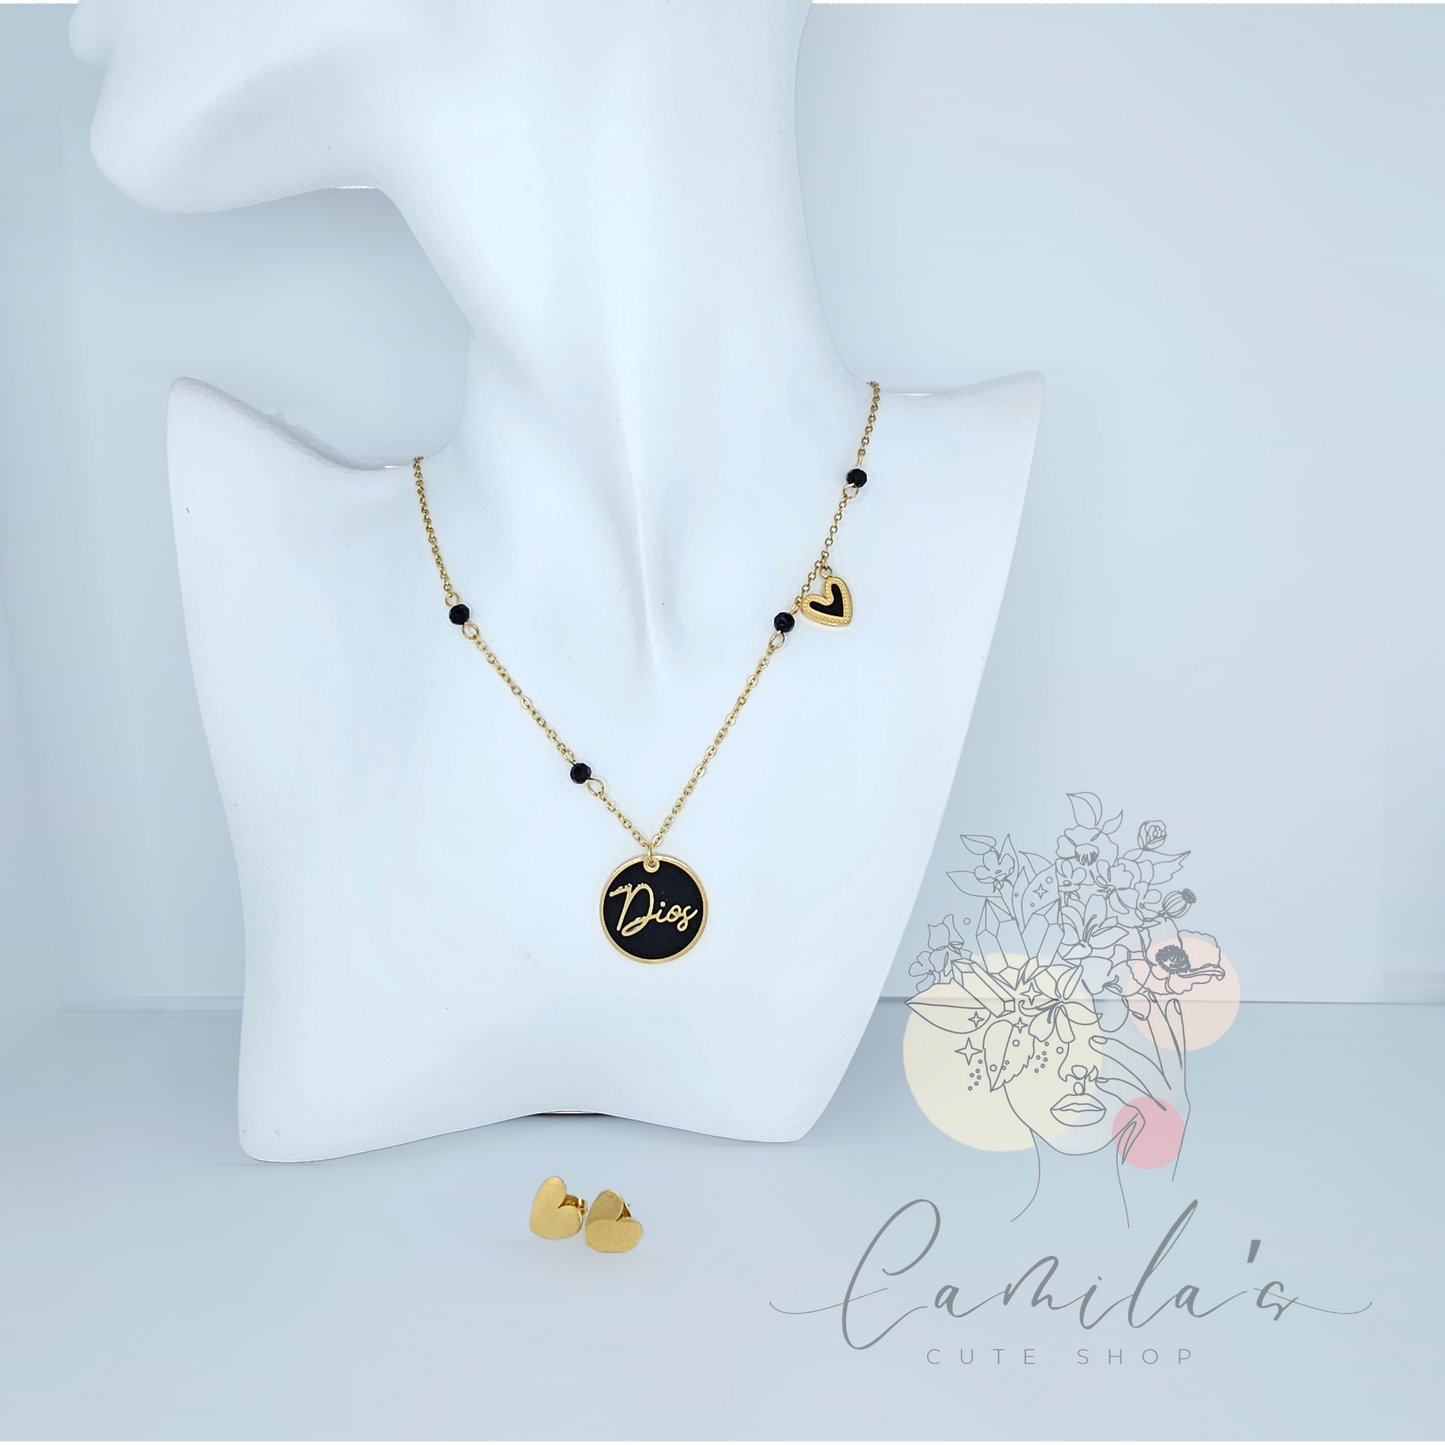 DIOS NECKLACE AND EARRINGS STAINLESS STEEL GOLD COLOR WITH BLACK RESIN DETAIL SET